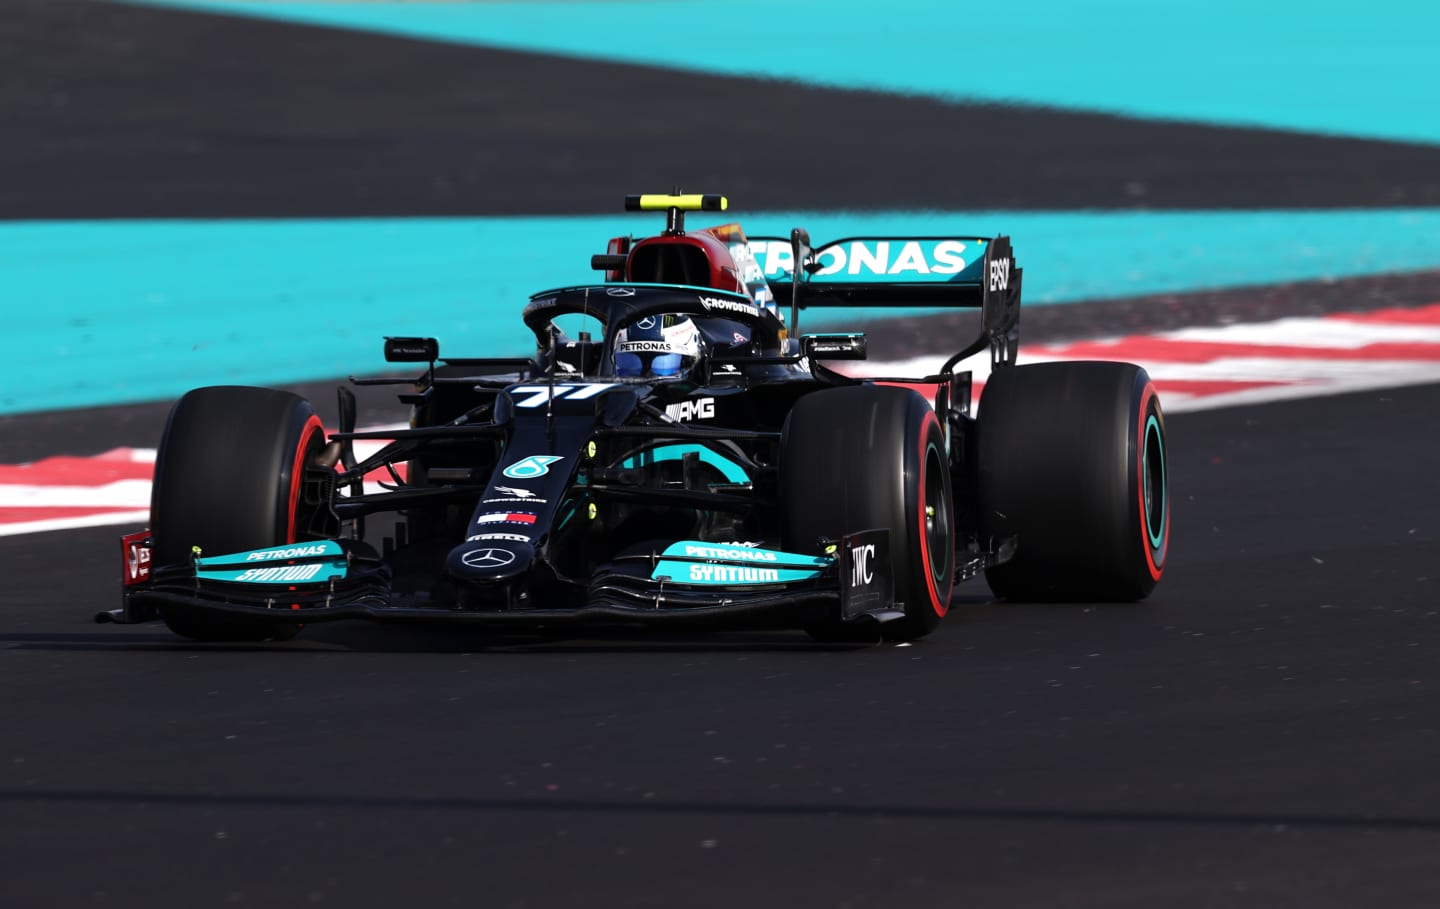 ABU DHABI, UNITED ARAB EMIRATES - DECEMBER 10: Valtteri Bottas of Finland driving the (77) Mercedes AMG Petronas F1 Team Mercedes W12 during practice ahead of the F1 Grand Prix of Abu Dhabi at Yas Marina Circuit on December 10, 2021 in Abu Dhabi, United Arab Emirates. (Photo by Lars Baron/Getty Images)